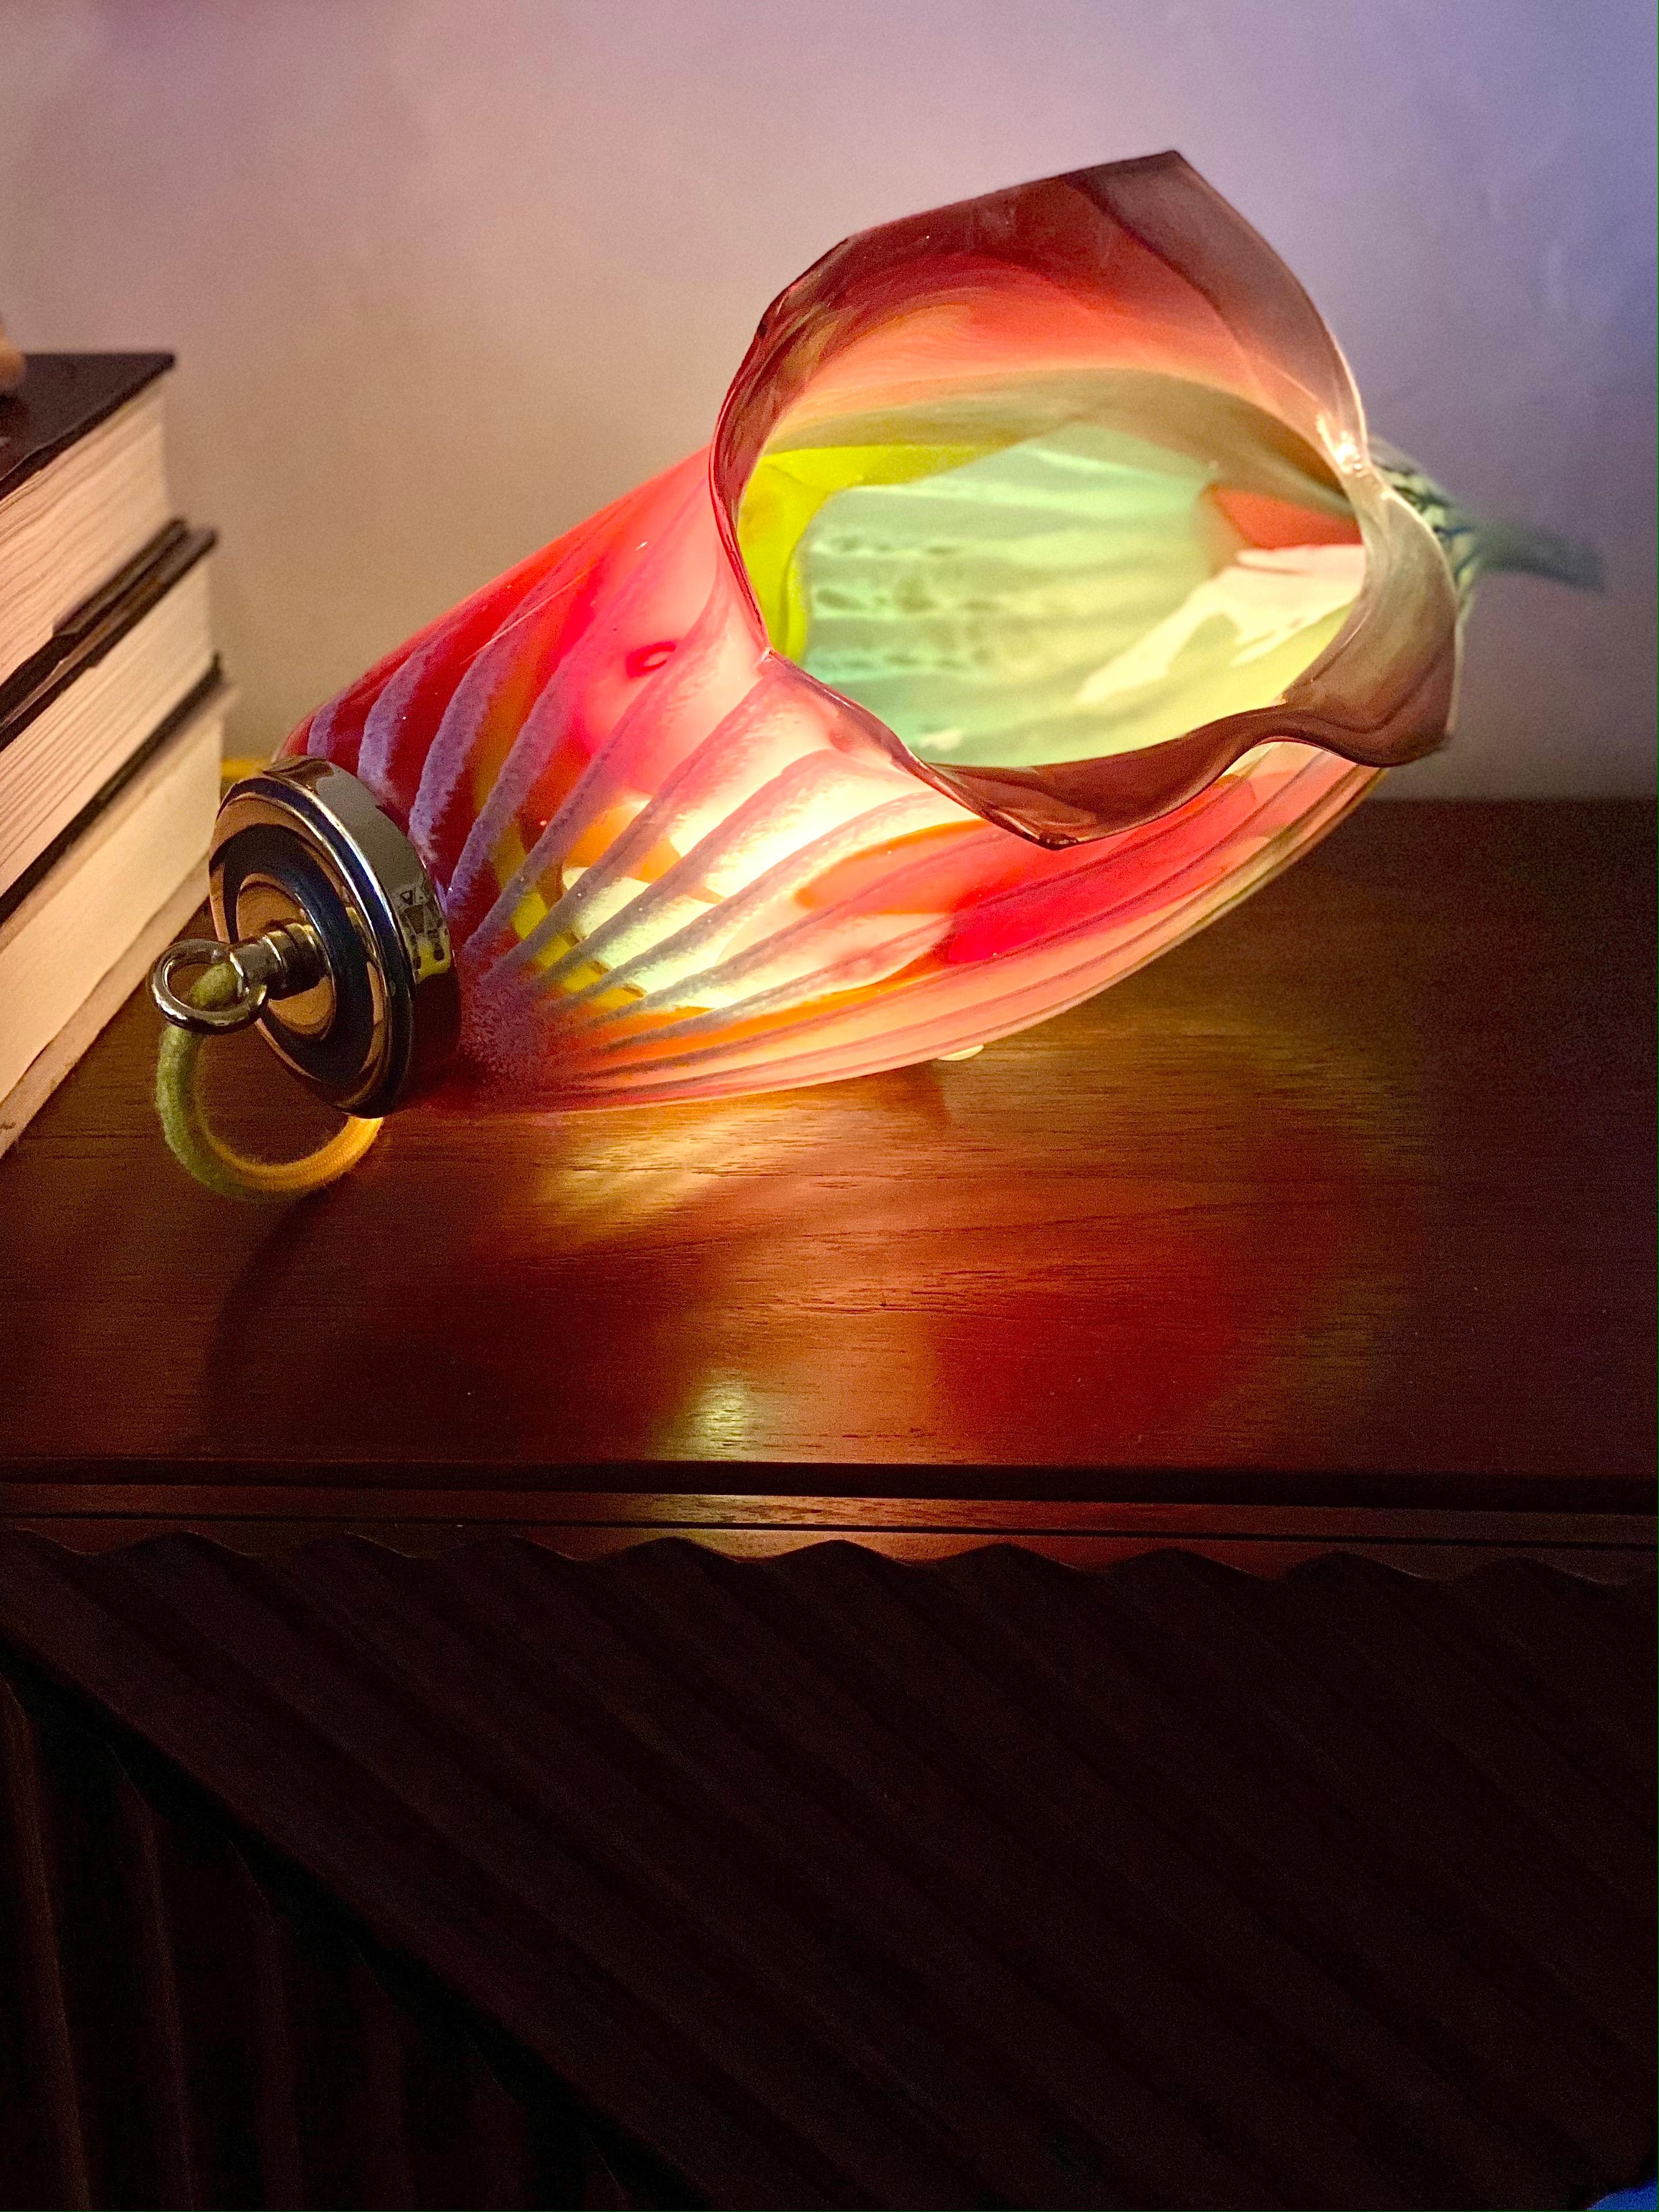 Blown Glass Table Lamp or Pendent Light, 21st Century by Mattia Biagi For Sale 1